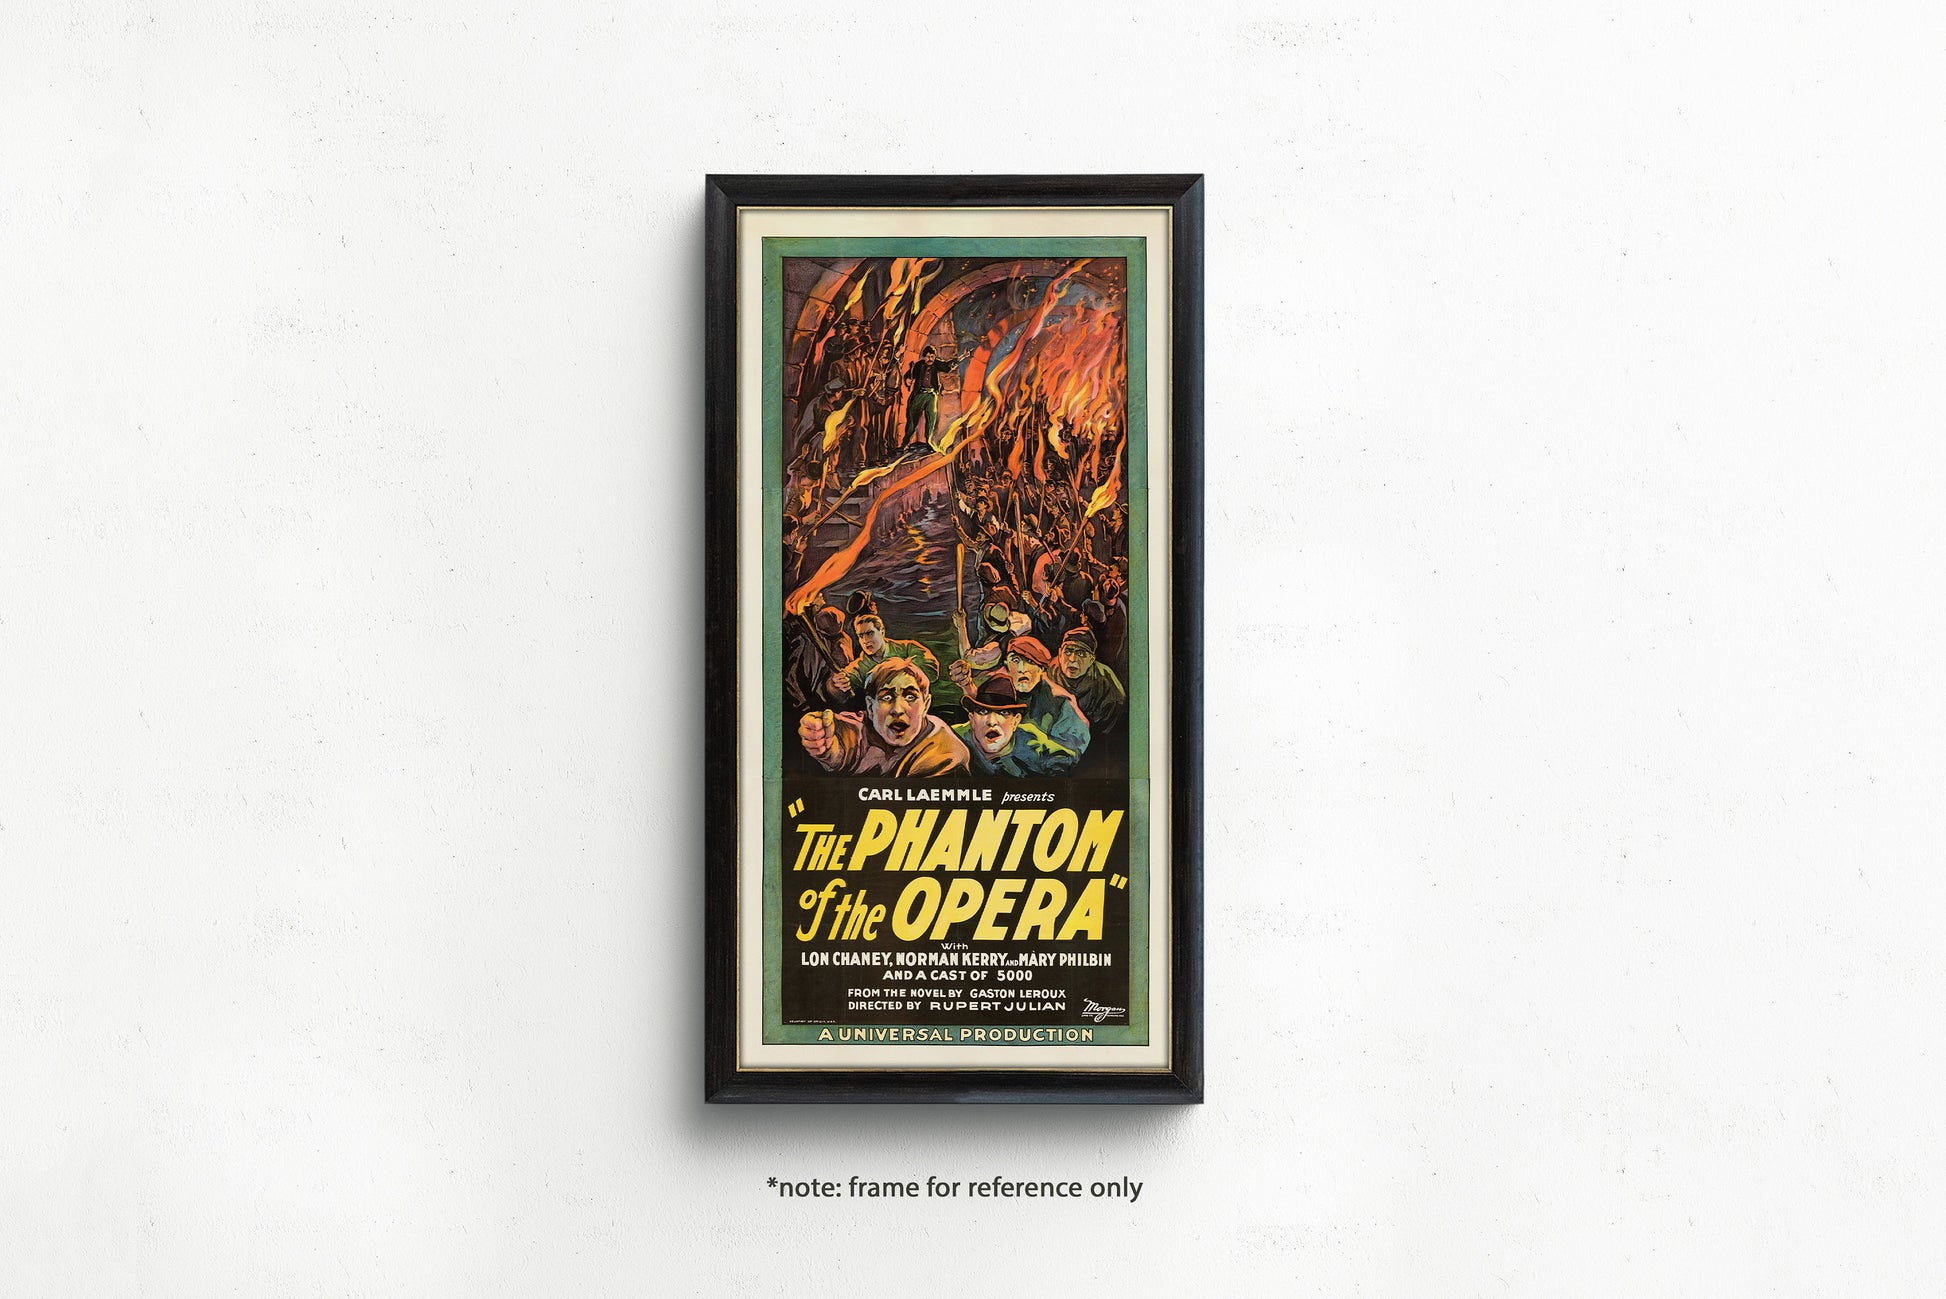 The Phantom of the Opera | Vintage Movie Poster (available framed or unframed)